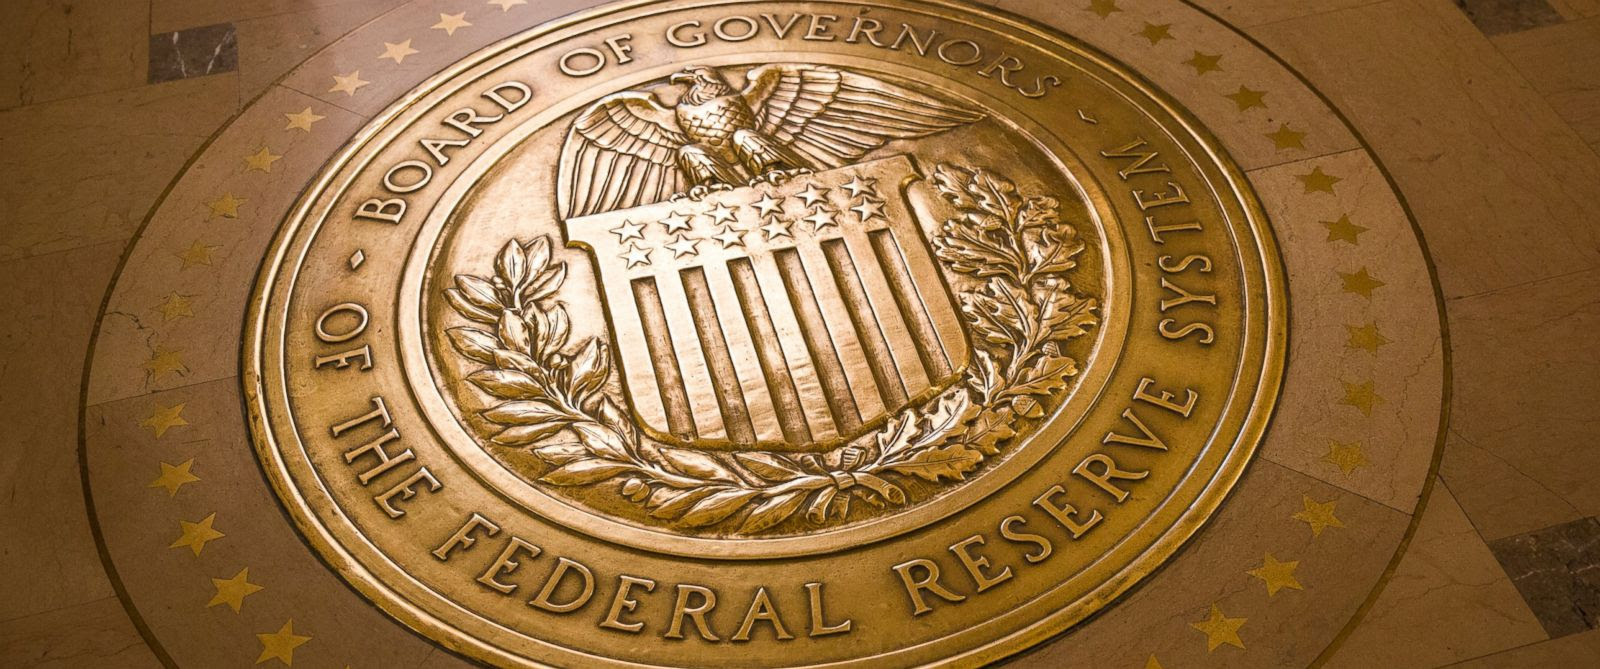 FOMC is expected to increase the Interest Rate tomorrow at 1800 (GMT